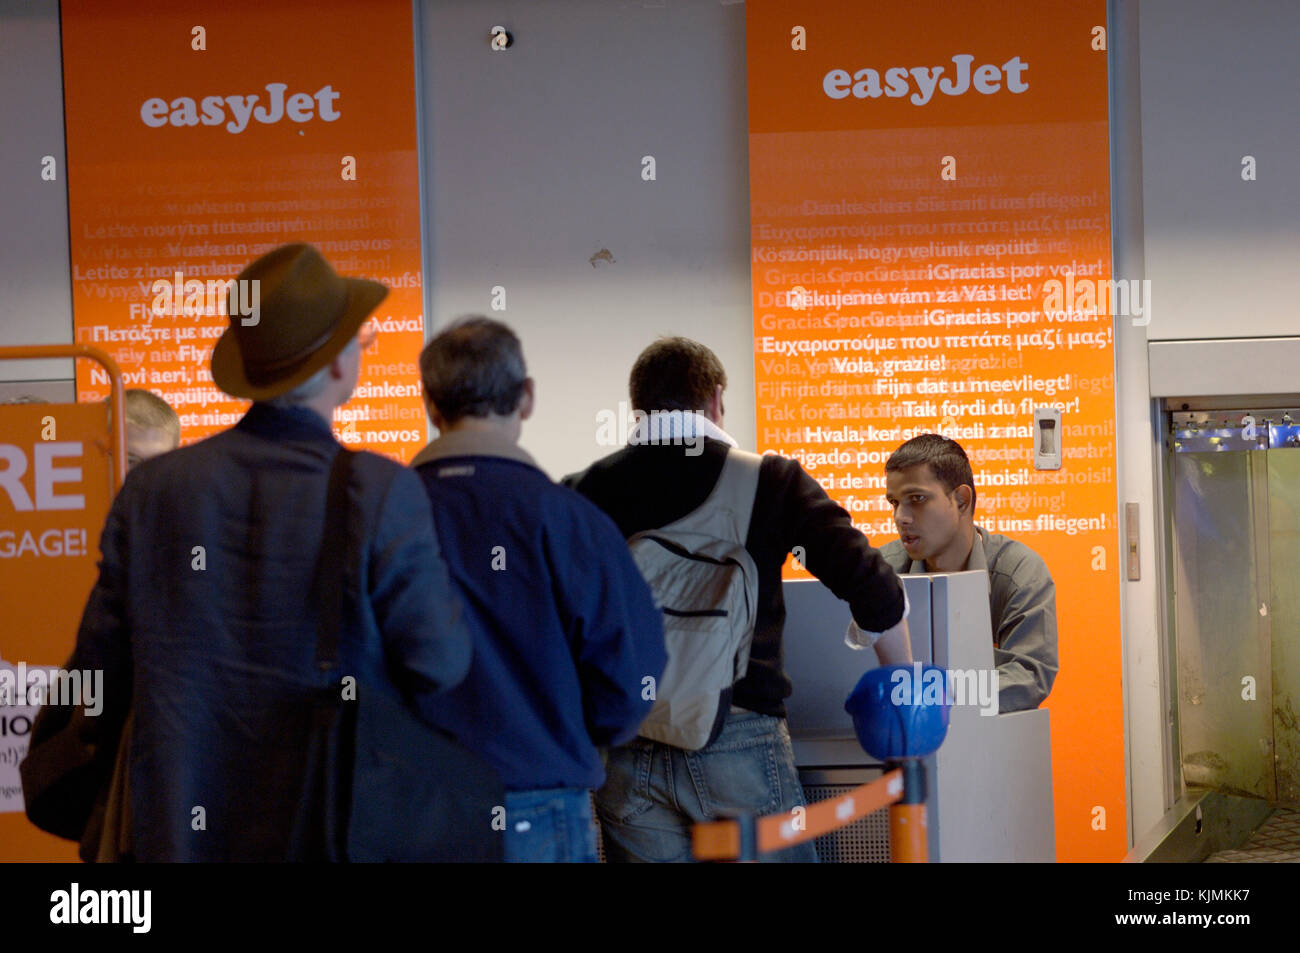 easyJet check-in queue with businessmen in suits with carry-on baggage Stock Photo